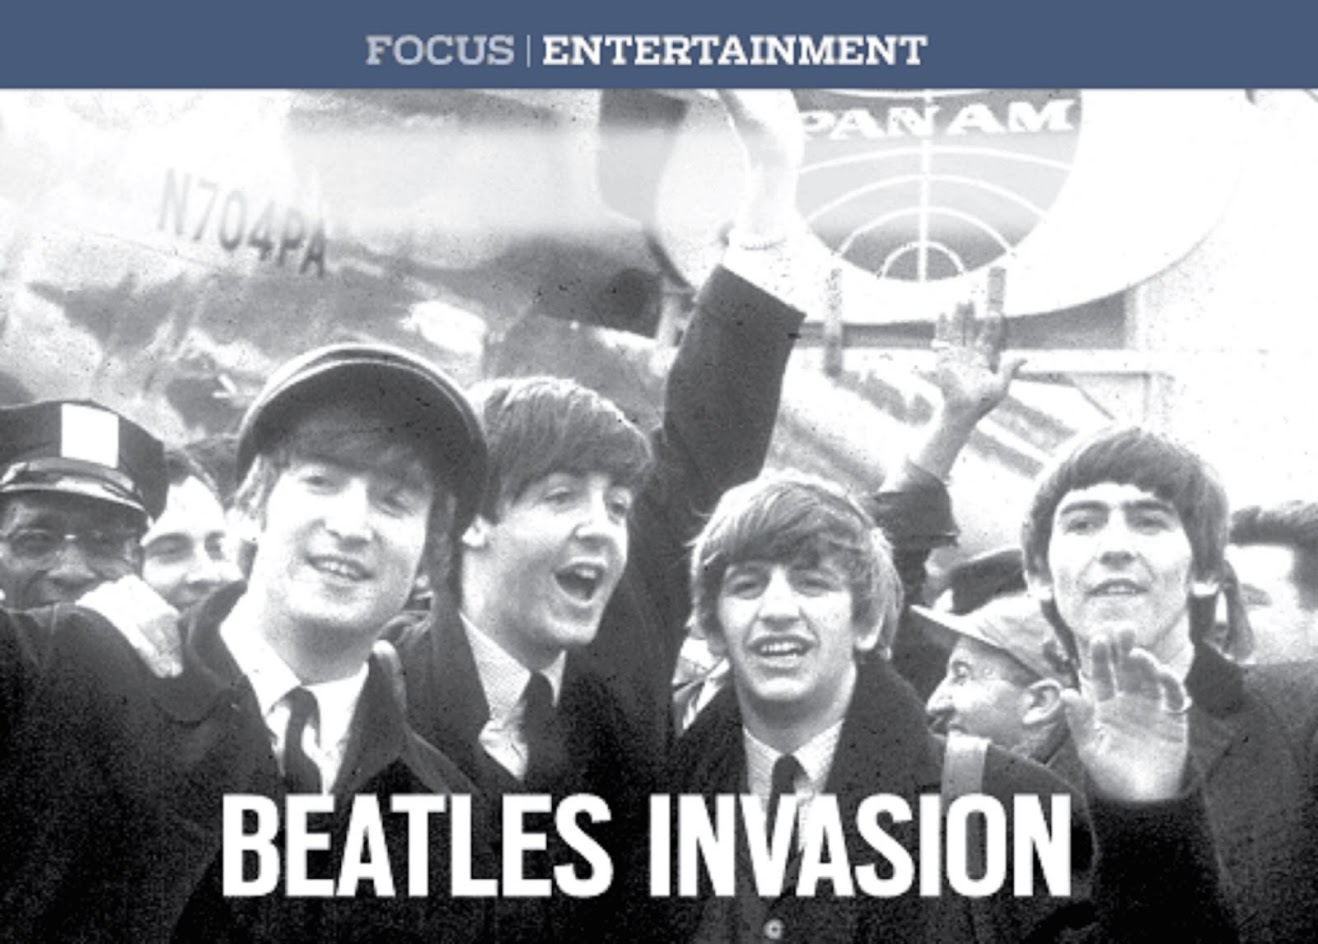 THE BEATLES INVASION OF THE US AND THE WORLD WAS AT JFK INTERNATIONAL AIRPORT ON FEBRUARY 9th 1964